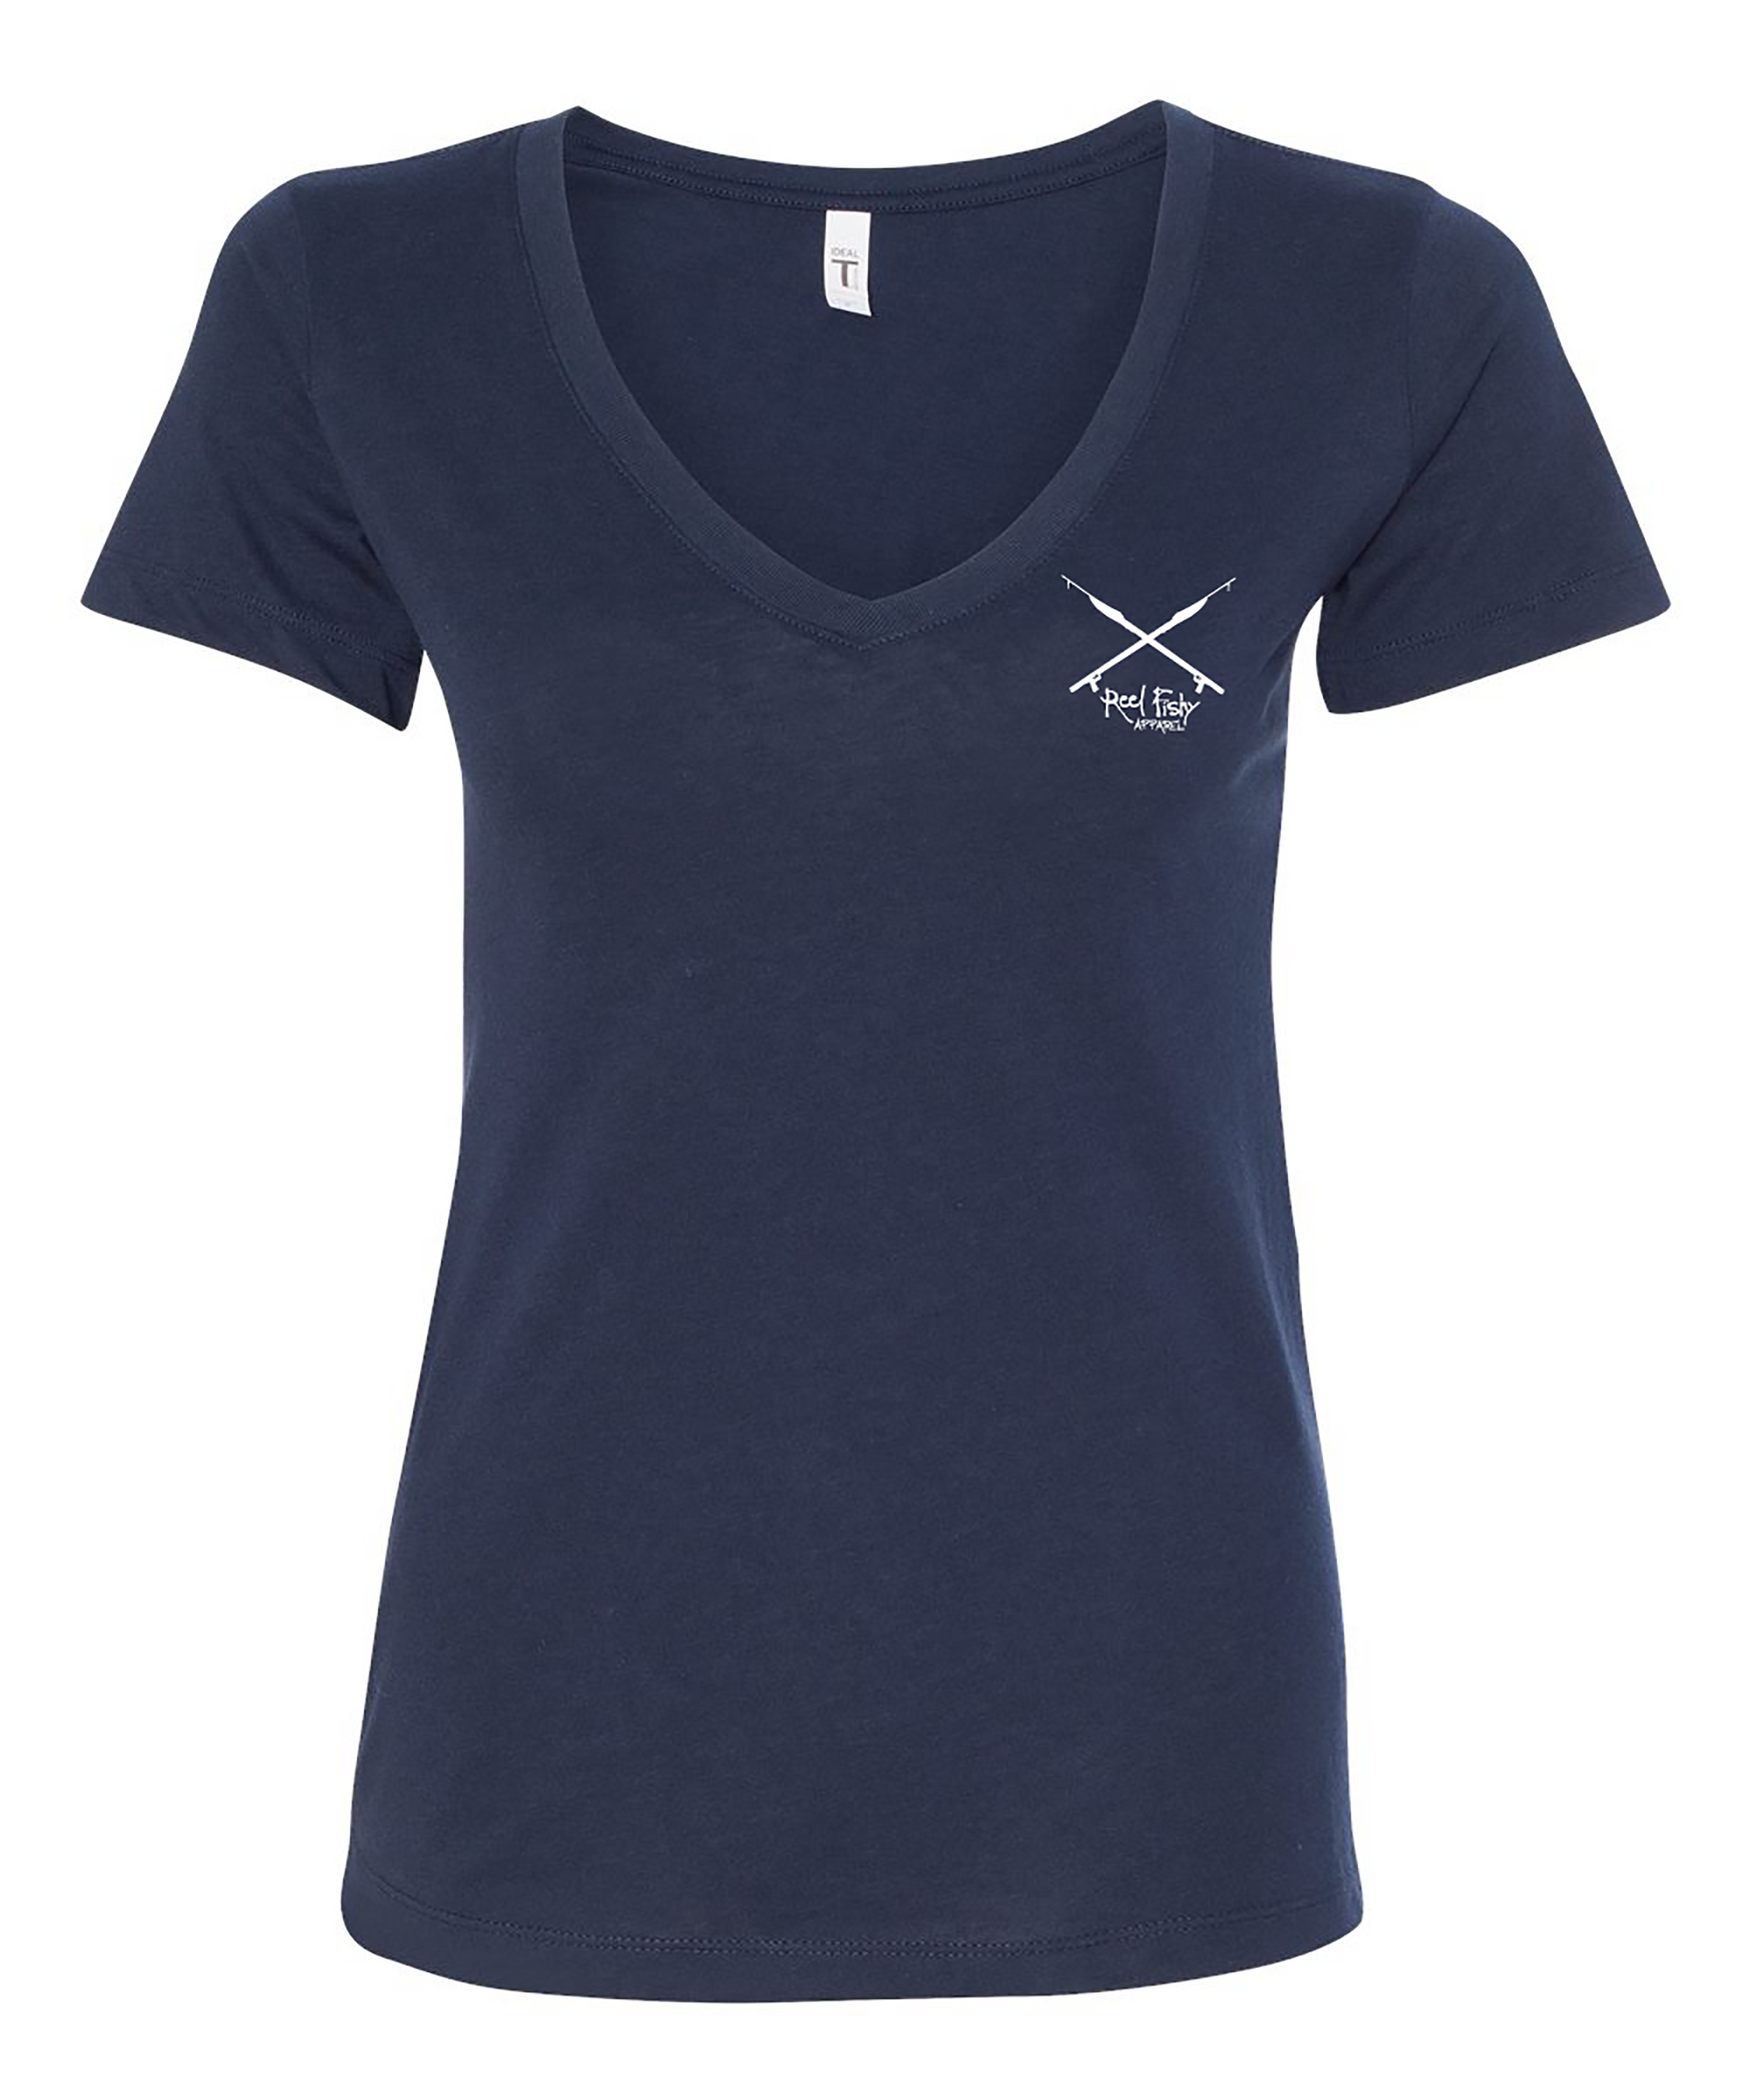 Ladies Lionfish Cotton V-neck t-shirt in Navy (front Reel Fishy Spear Rods logo)